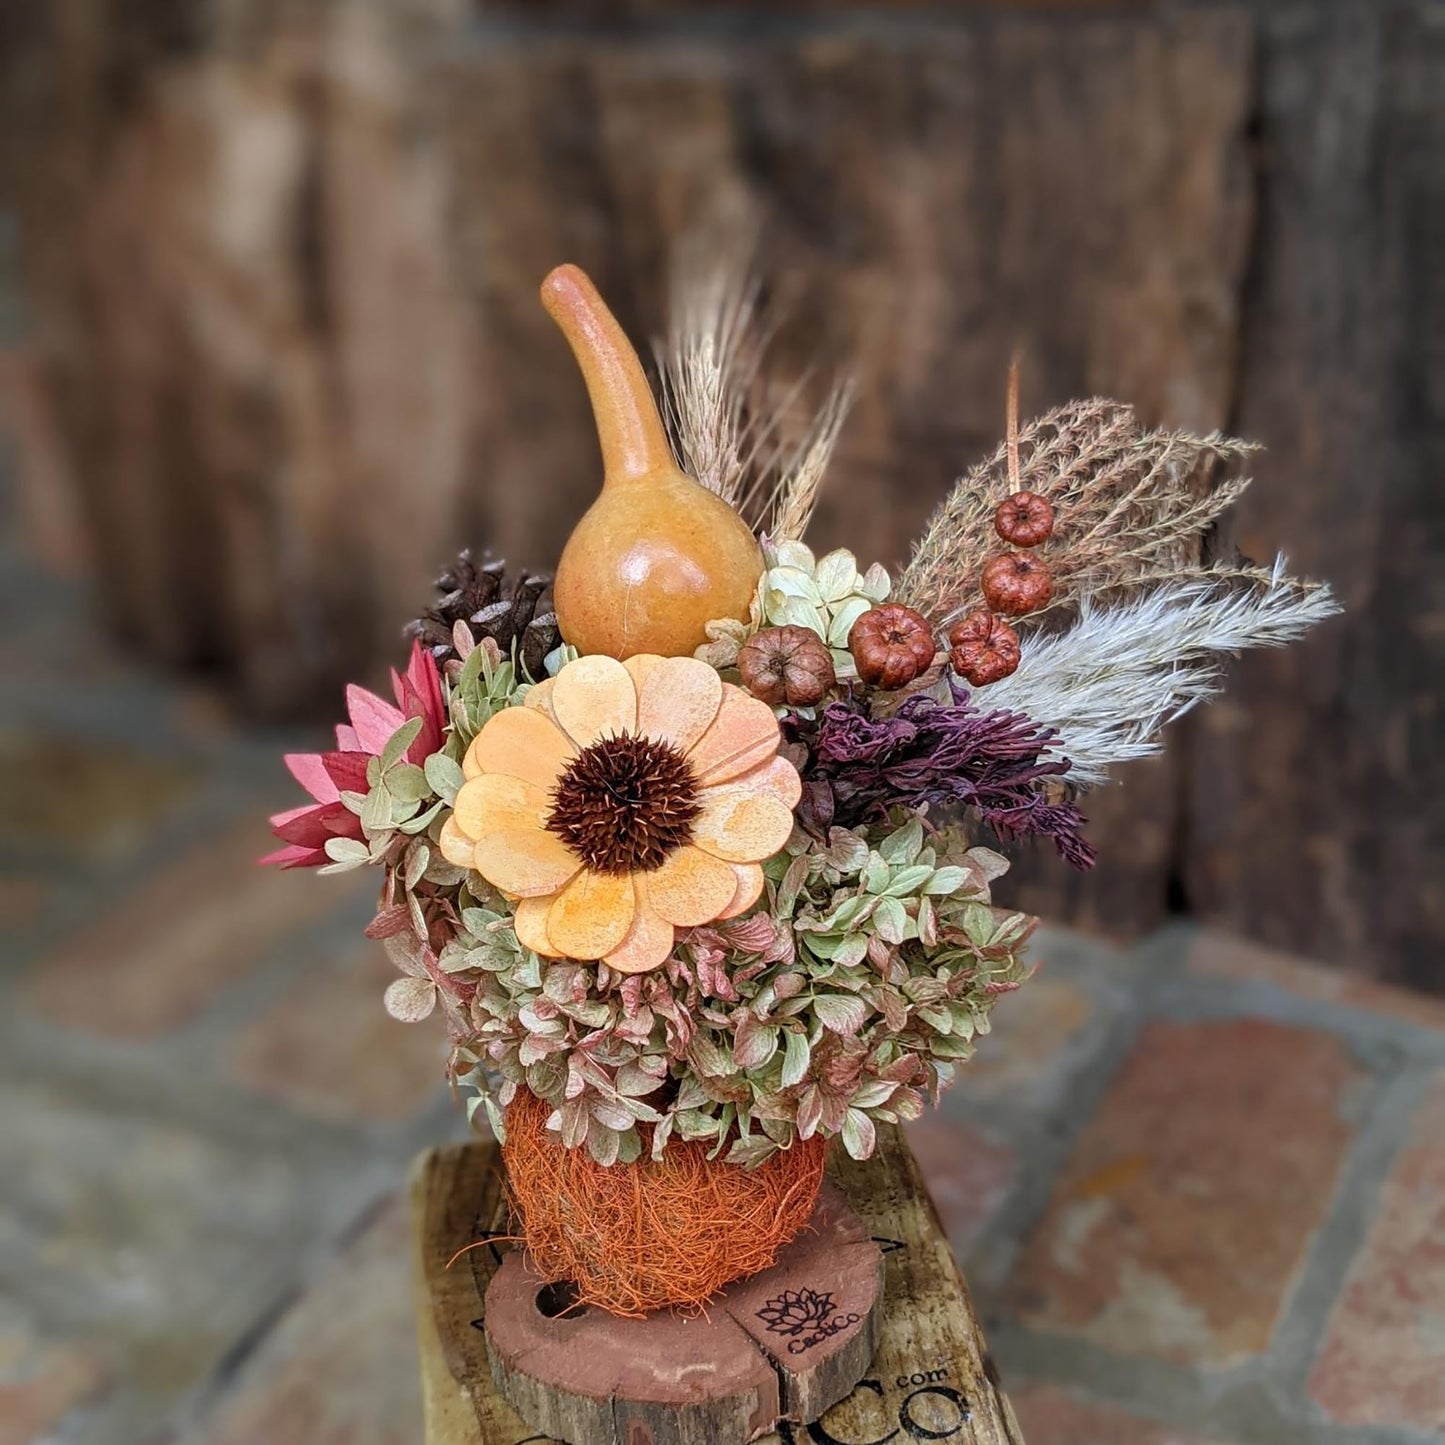 Happy Fall Thanksgiving Gift Set: Preserved Floral Centerpiece with Fragrance | Harvest Gift | Eco Friendly | Fall Décor